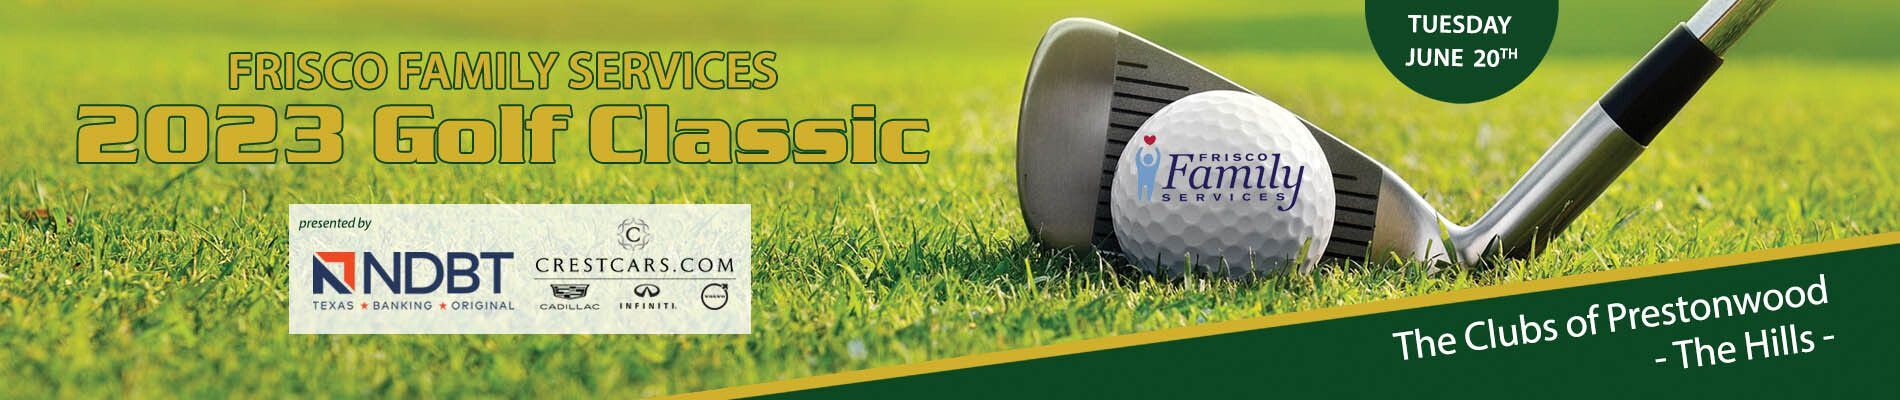 Frisco Family Services Annual Golf Classic 